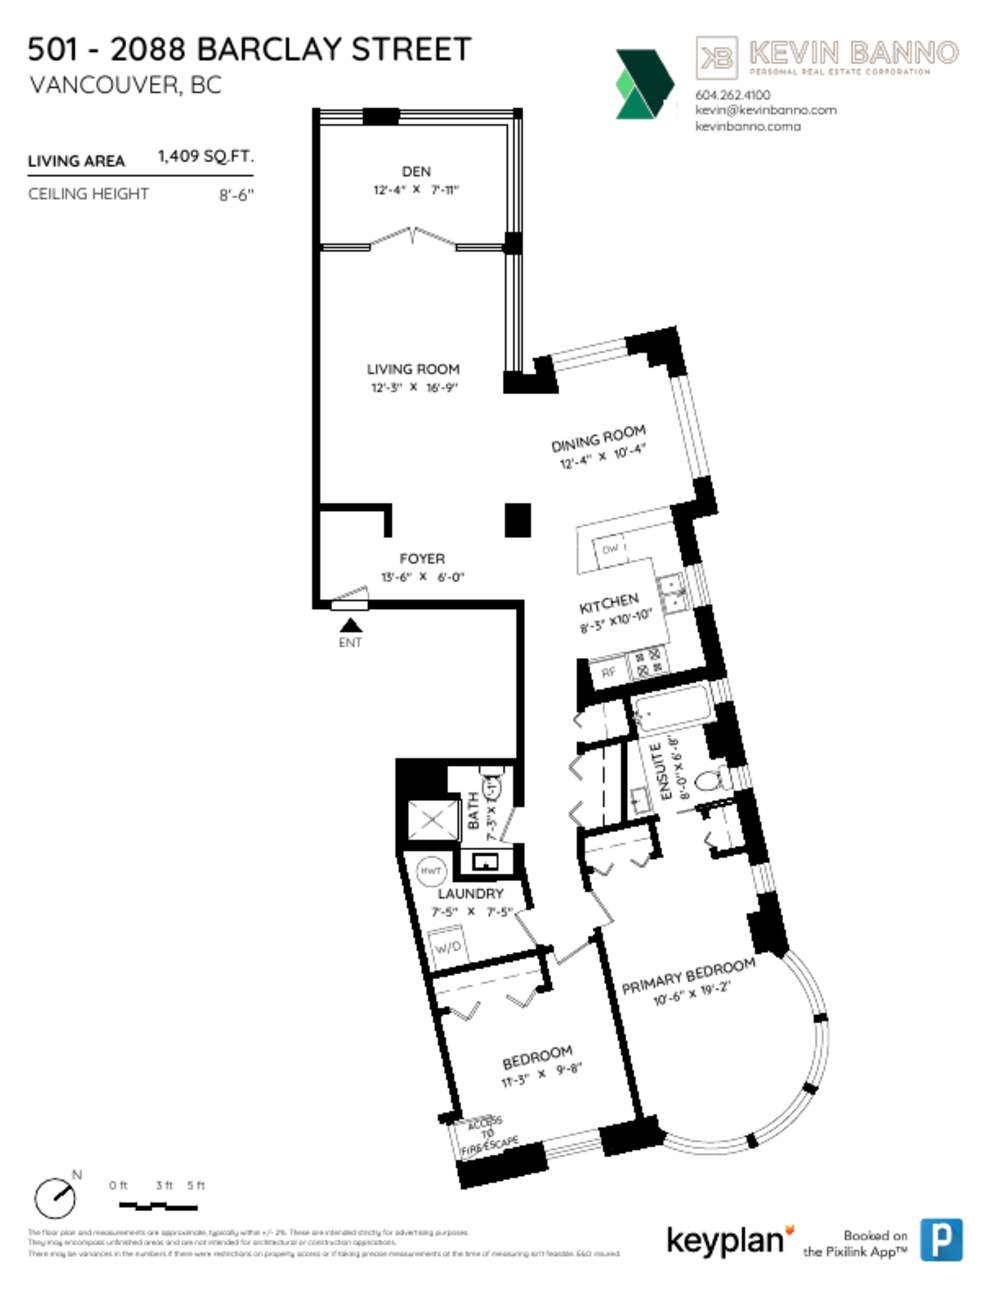 Floor Plan for a 2 Bedroom Apartment in Vancouver